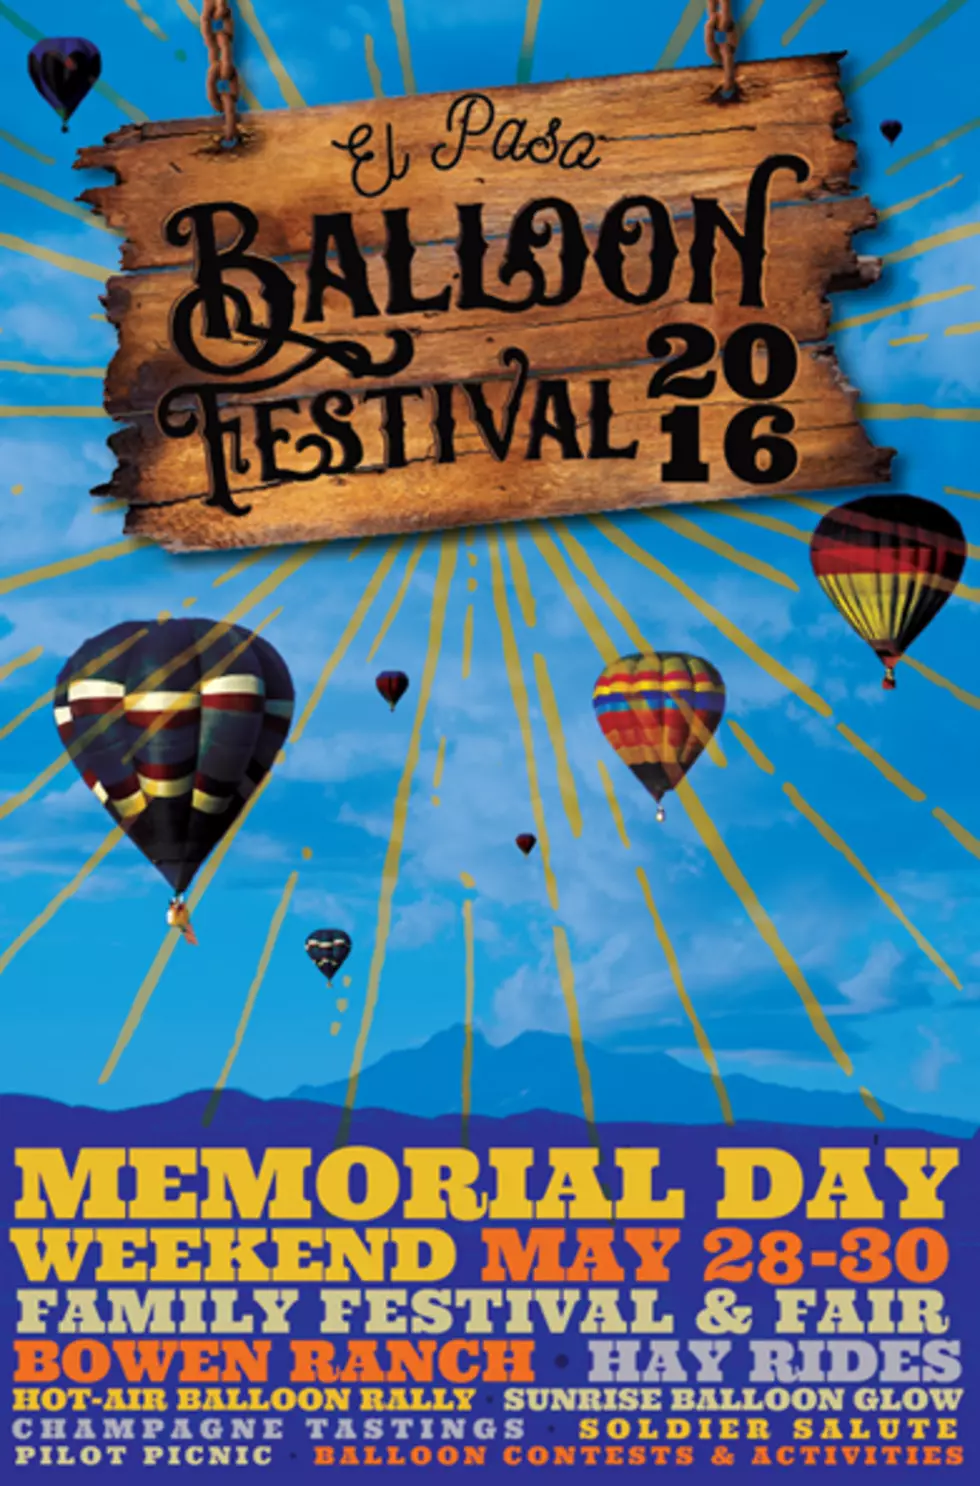 Welcome to the 2016 El Paso Balloon Festival